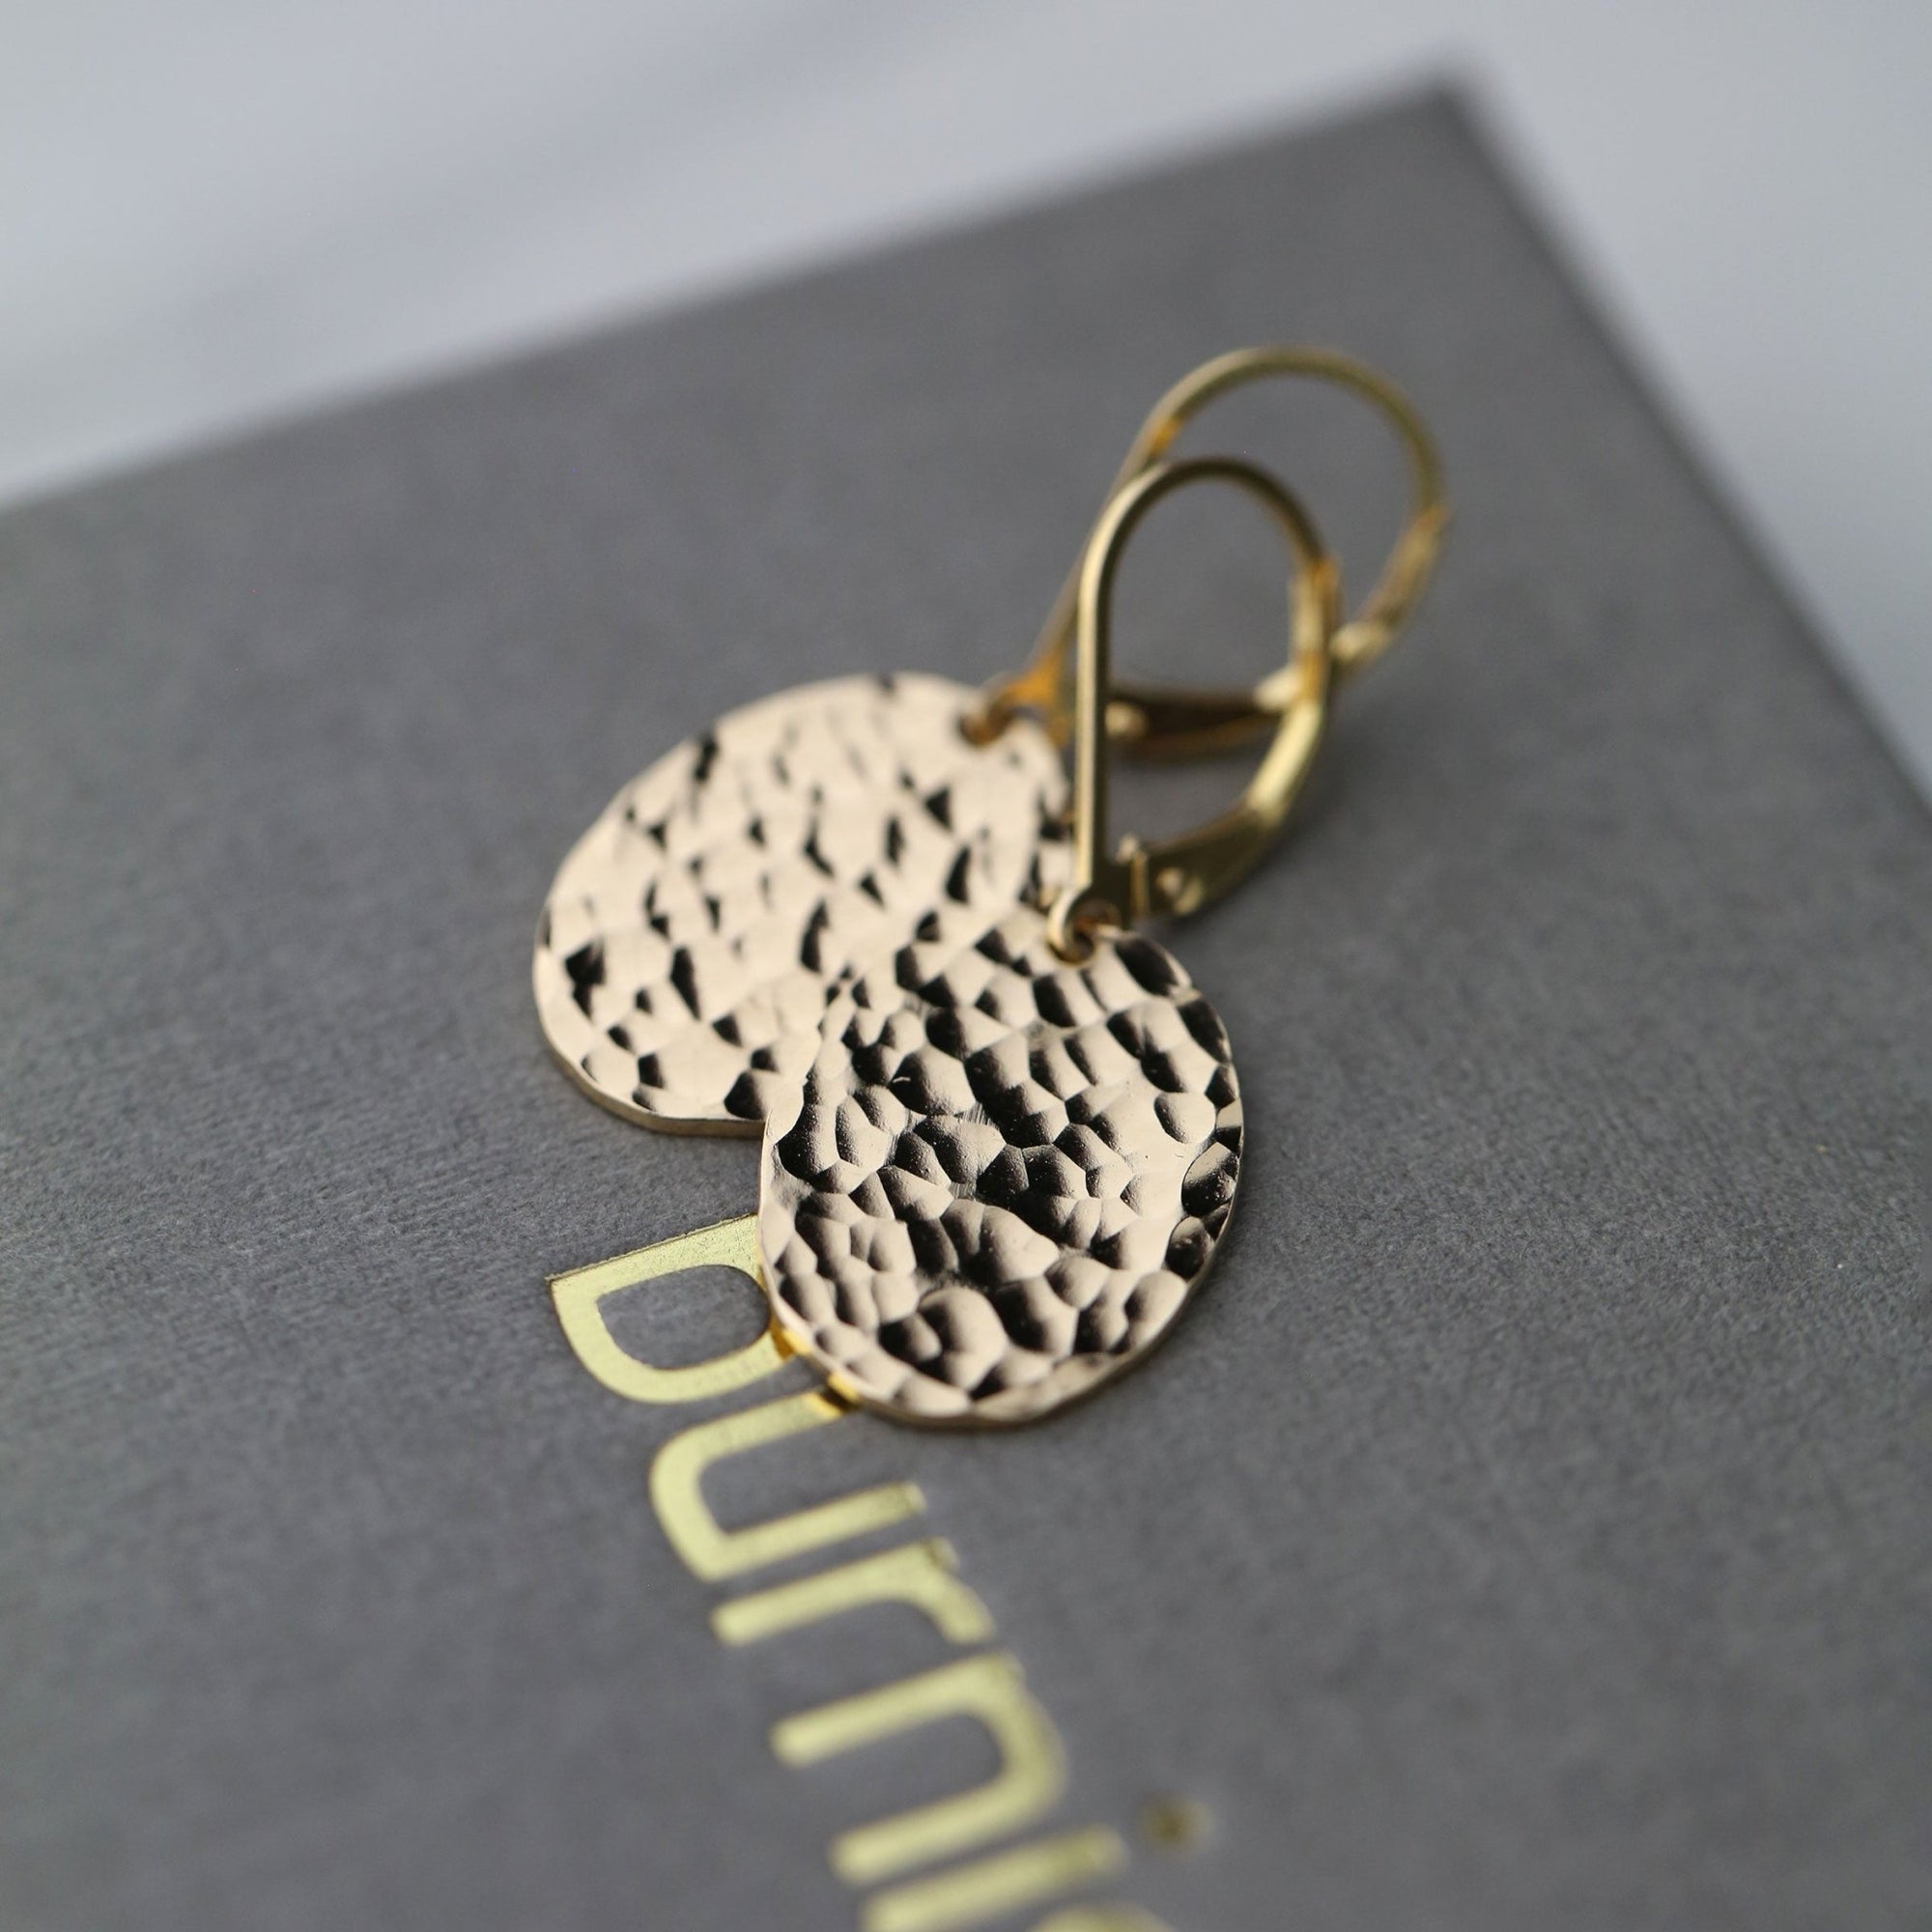 Oval Hammered Gold Lever-back Earrings handmade by Burnish